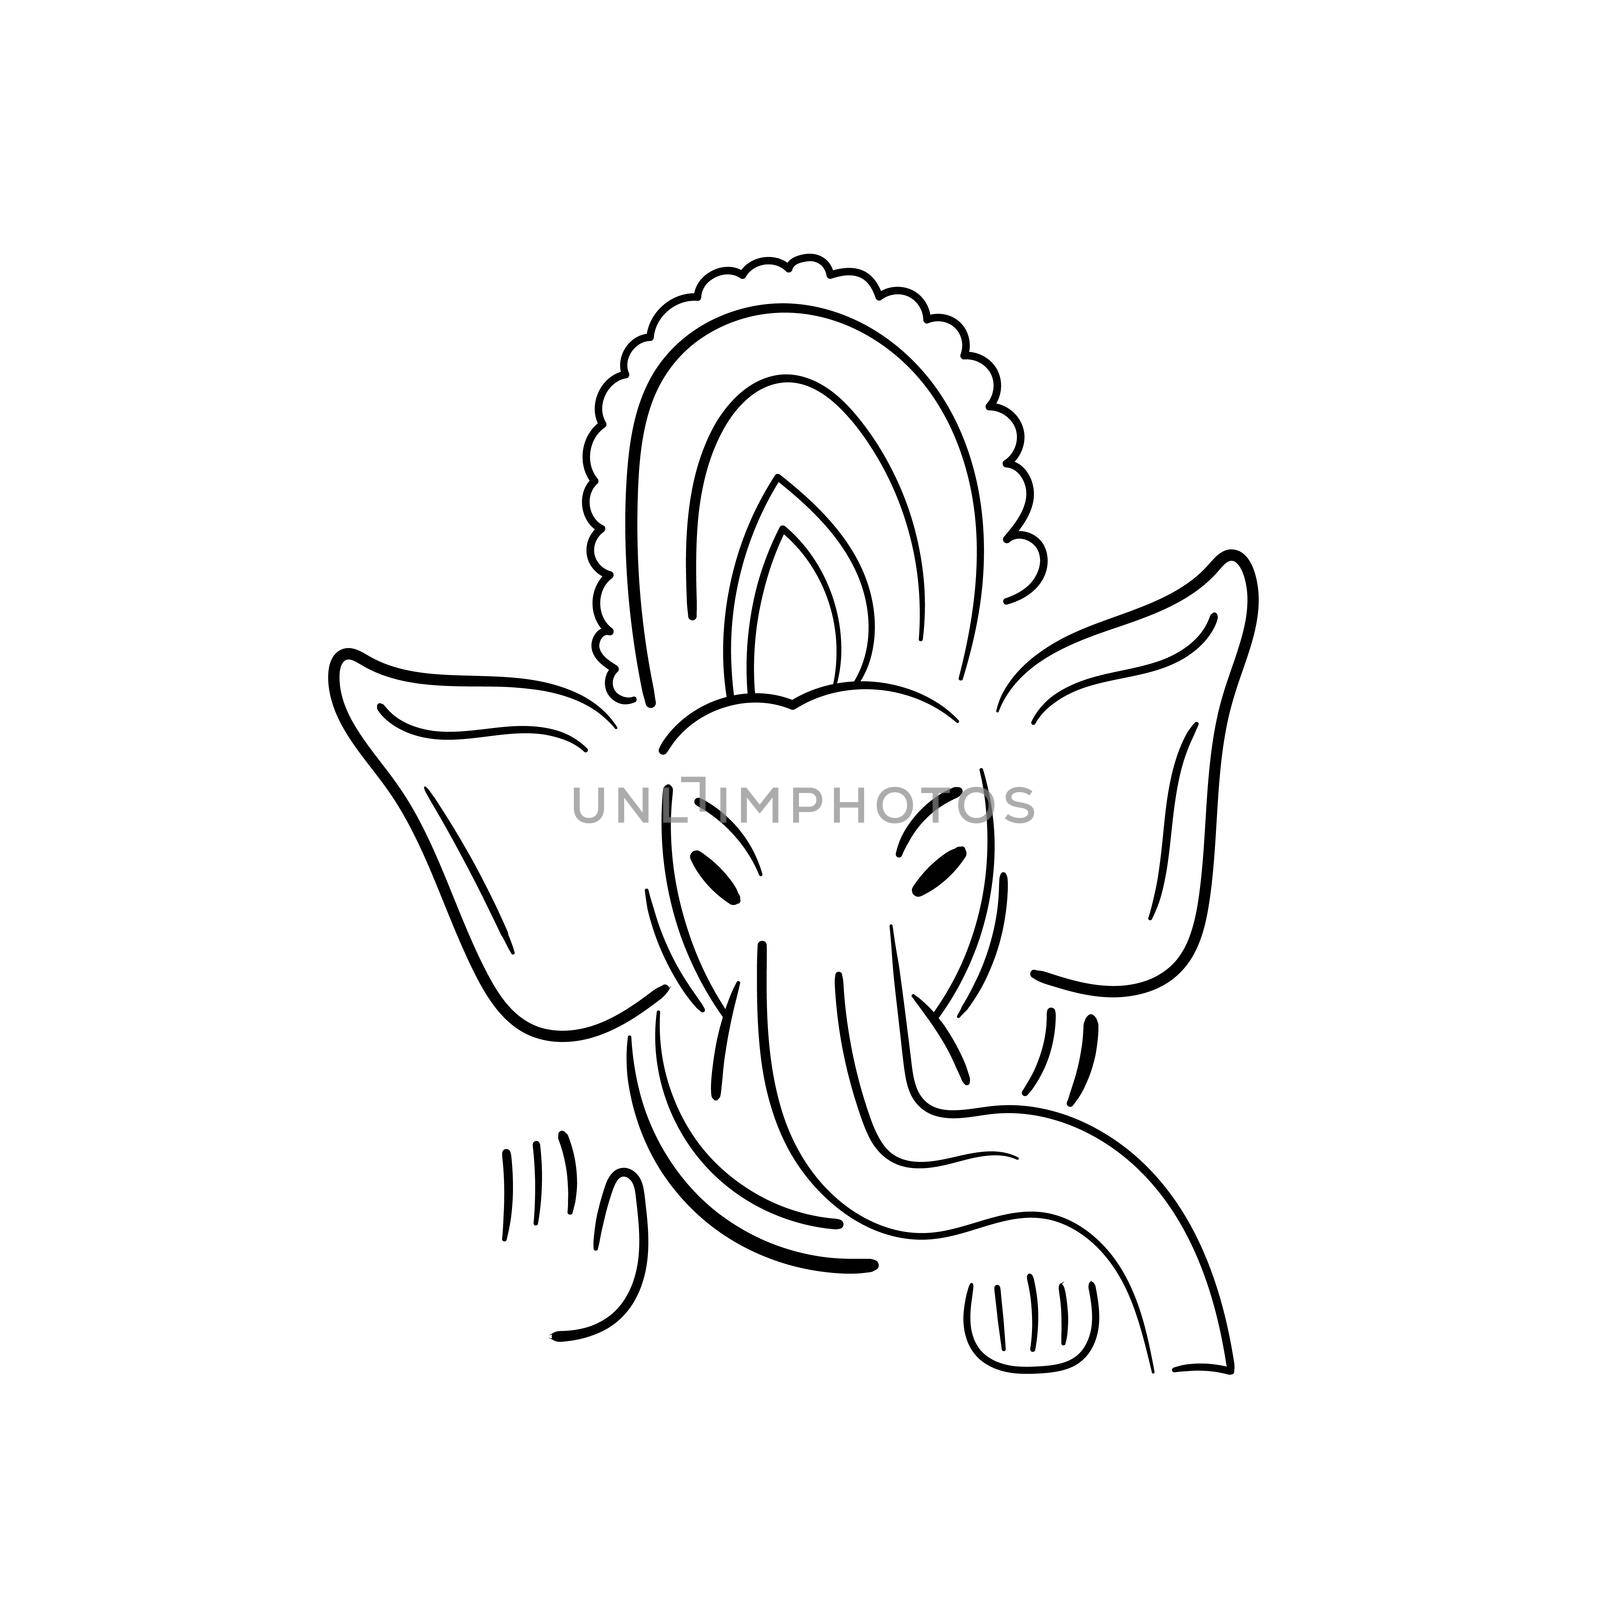 Happy Ganesh Chaturthi Festival Bacground Template with Lord Ganesha Head by natali_brill